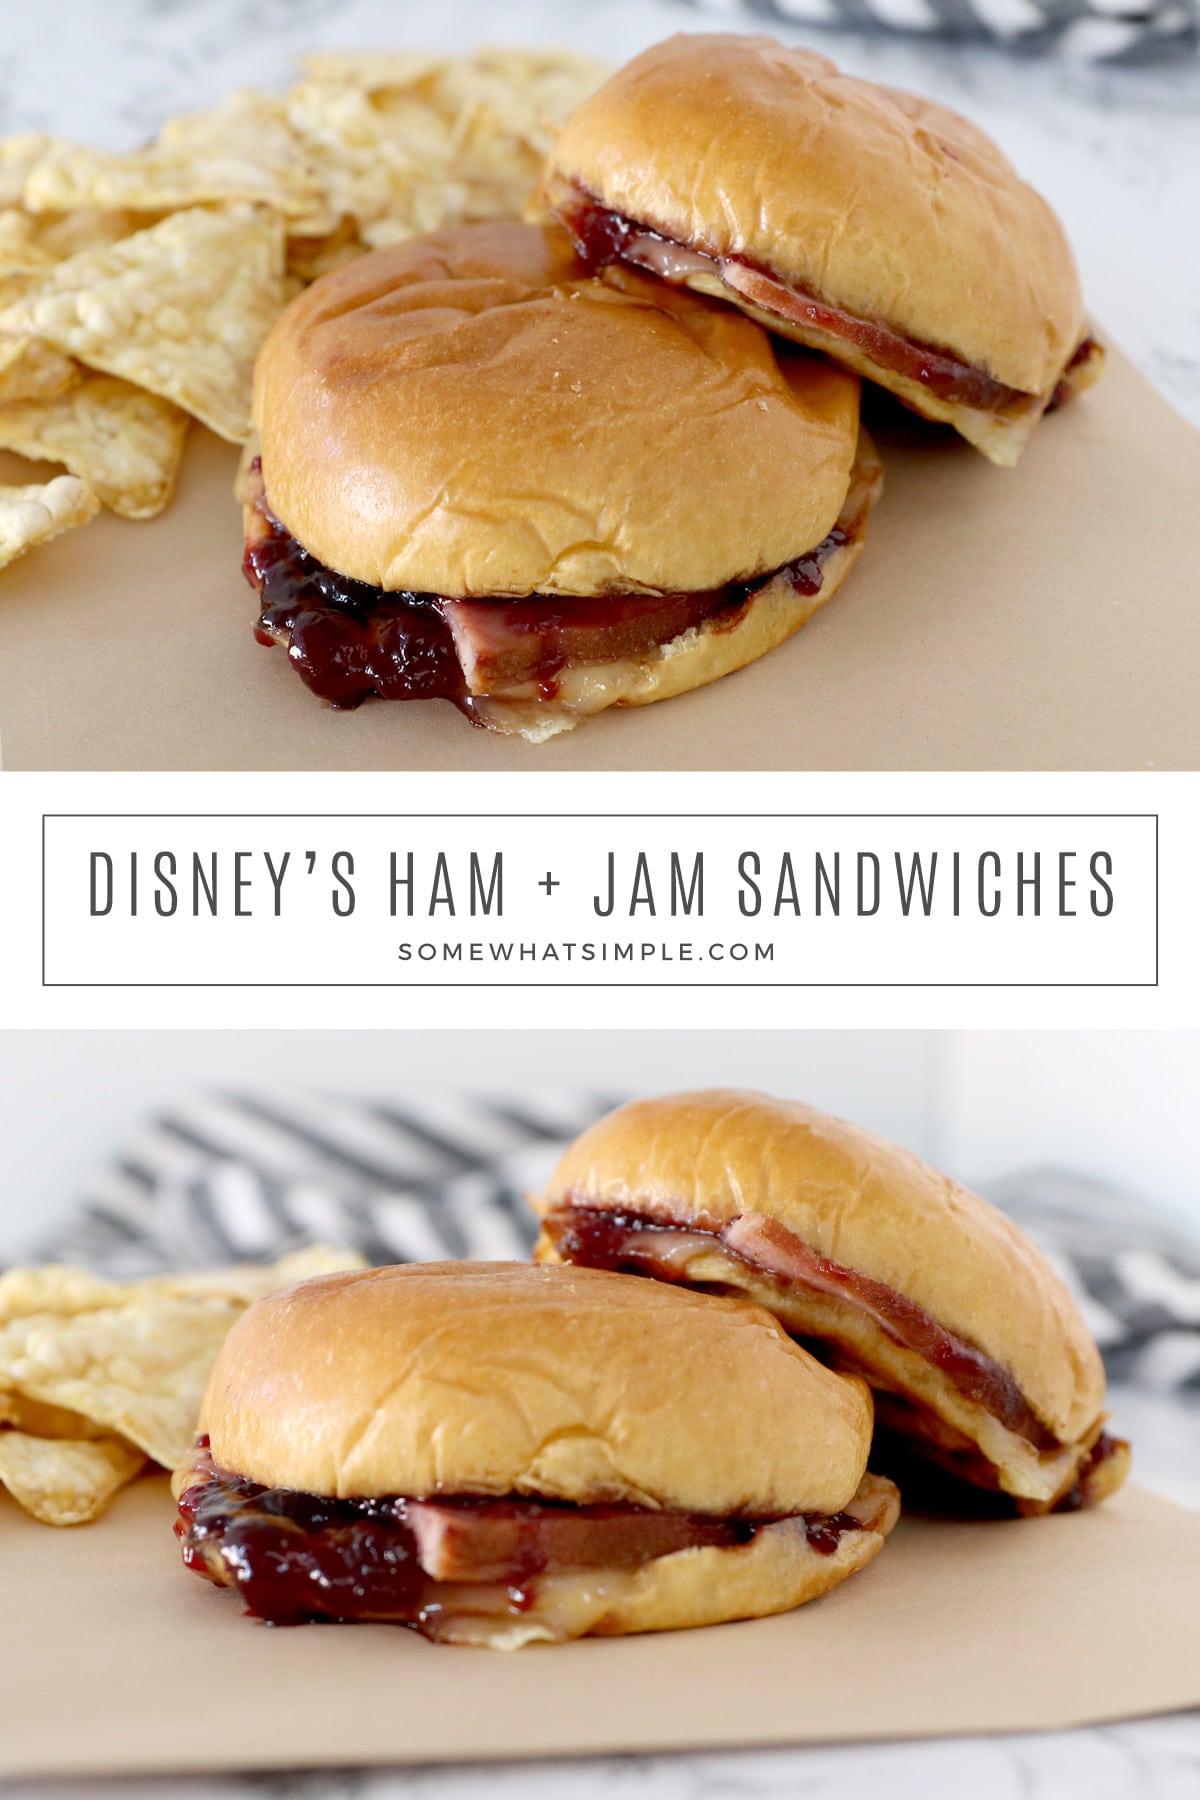 Can't decide what to have for lunch? A Ham and Jam Sandwich is packed with sliced ham, melted cheese, and sweet raspberry jam. It's grilled to perfection on a brioche bun that tastes great and is so easy to make! via @somewhatsimple